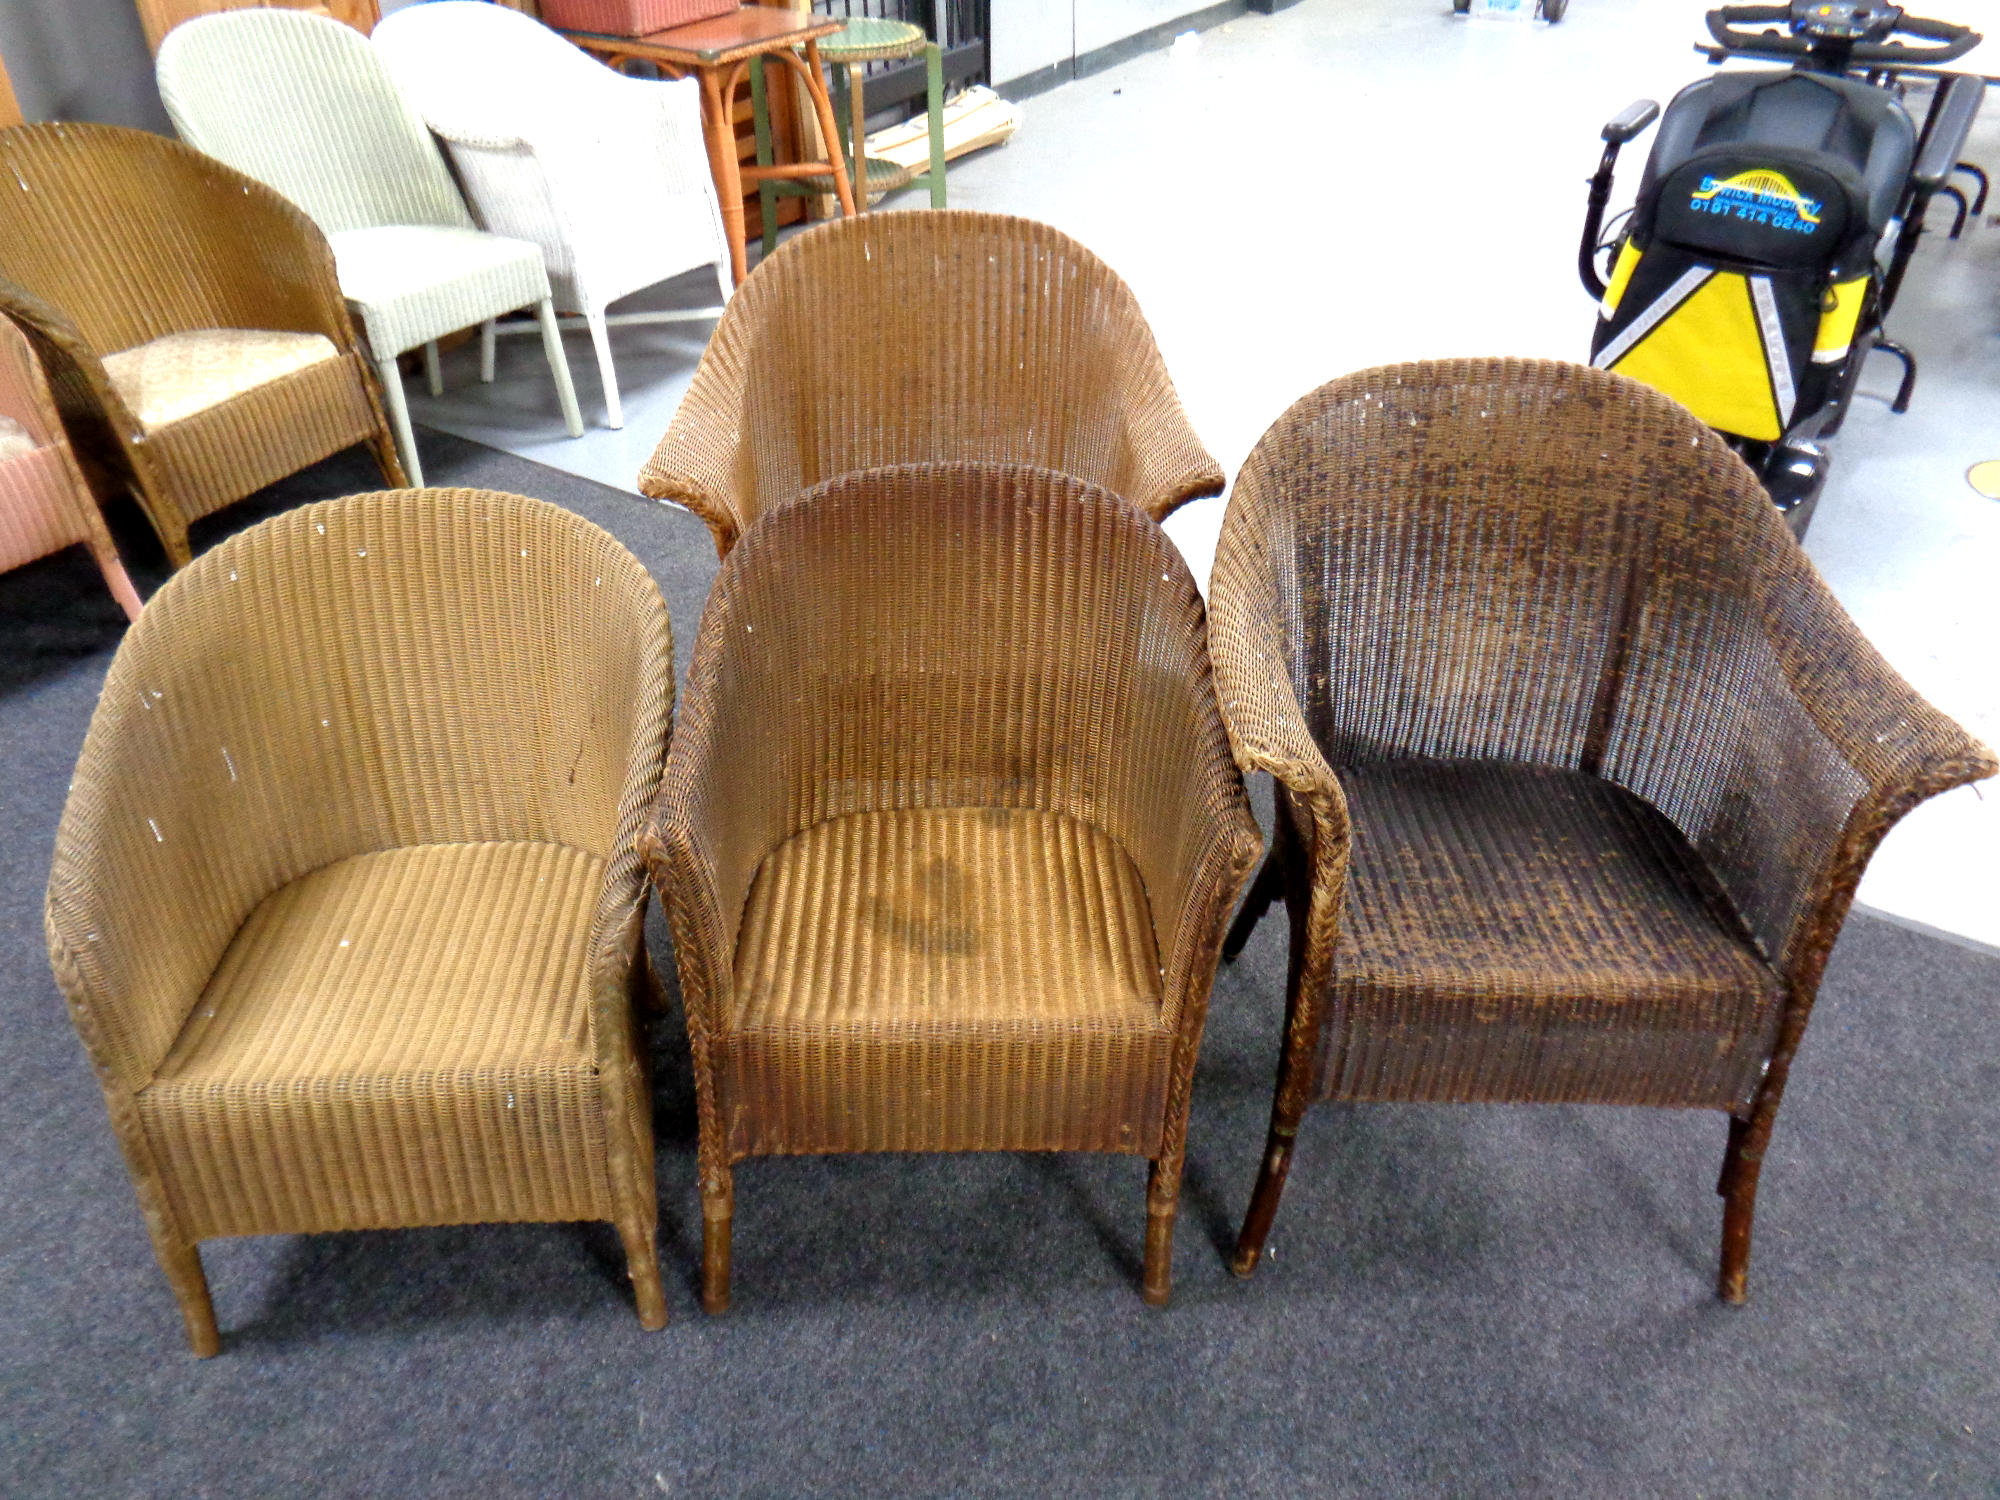 Four gold loom basket chairs